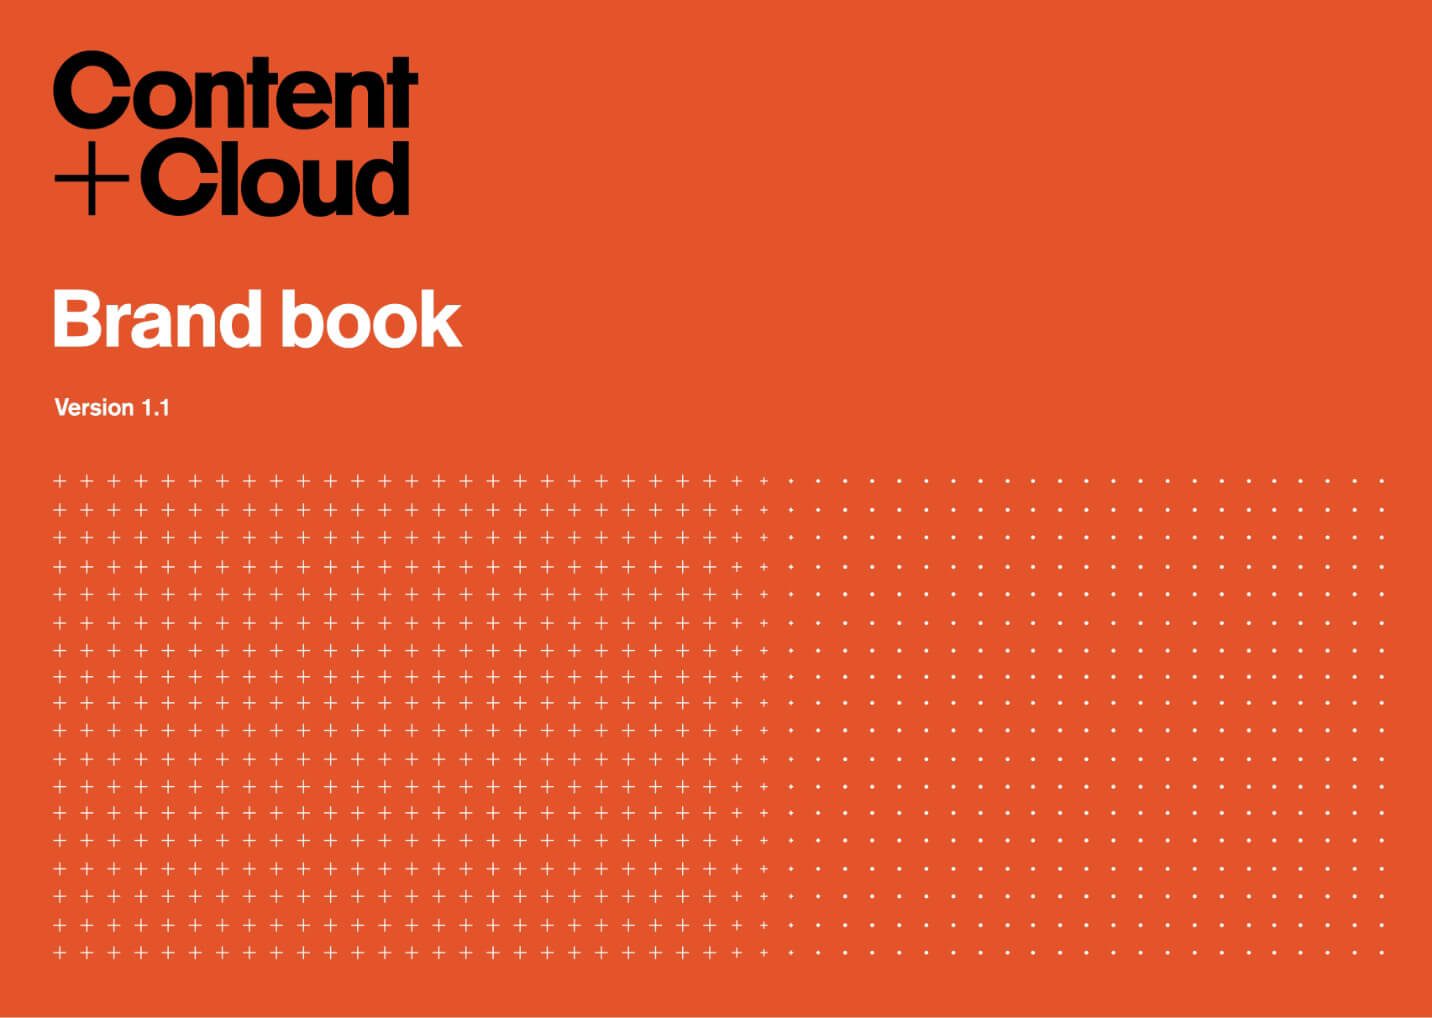 Content+Cloud Brand Book Page 1